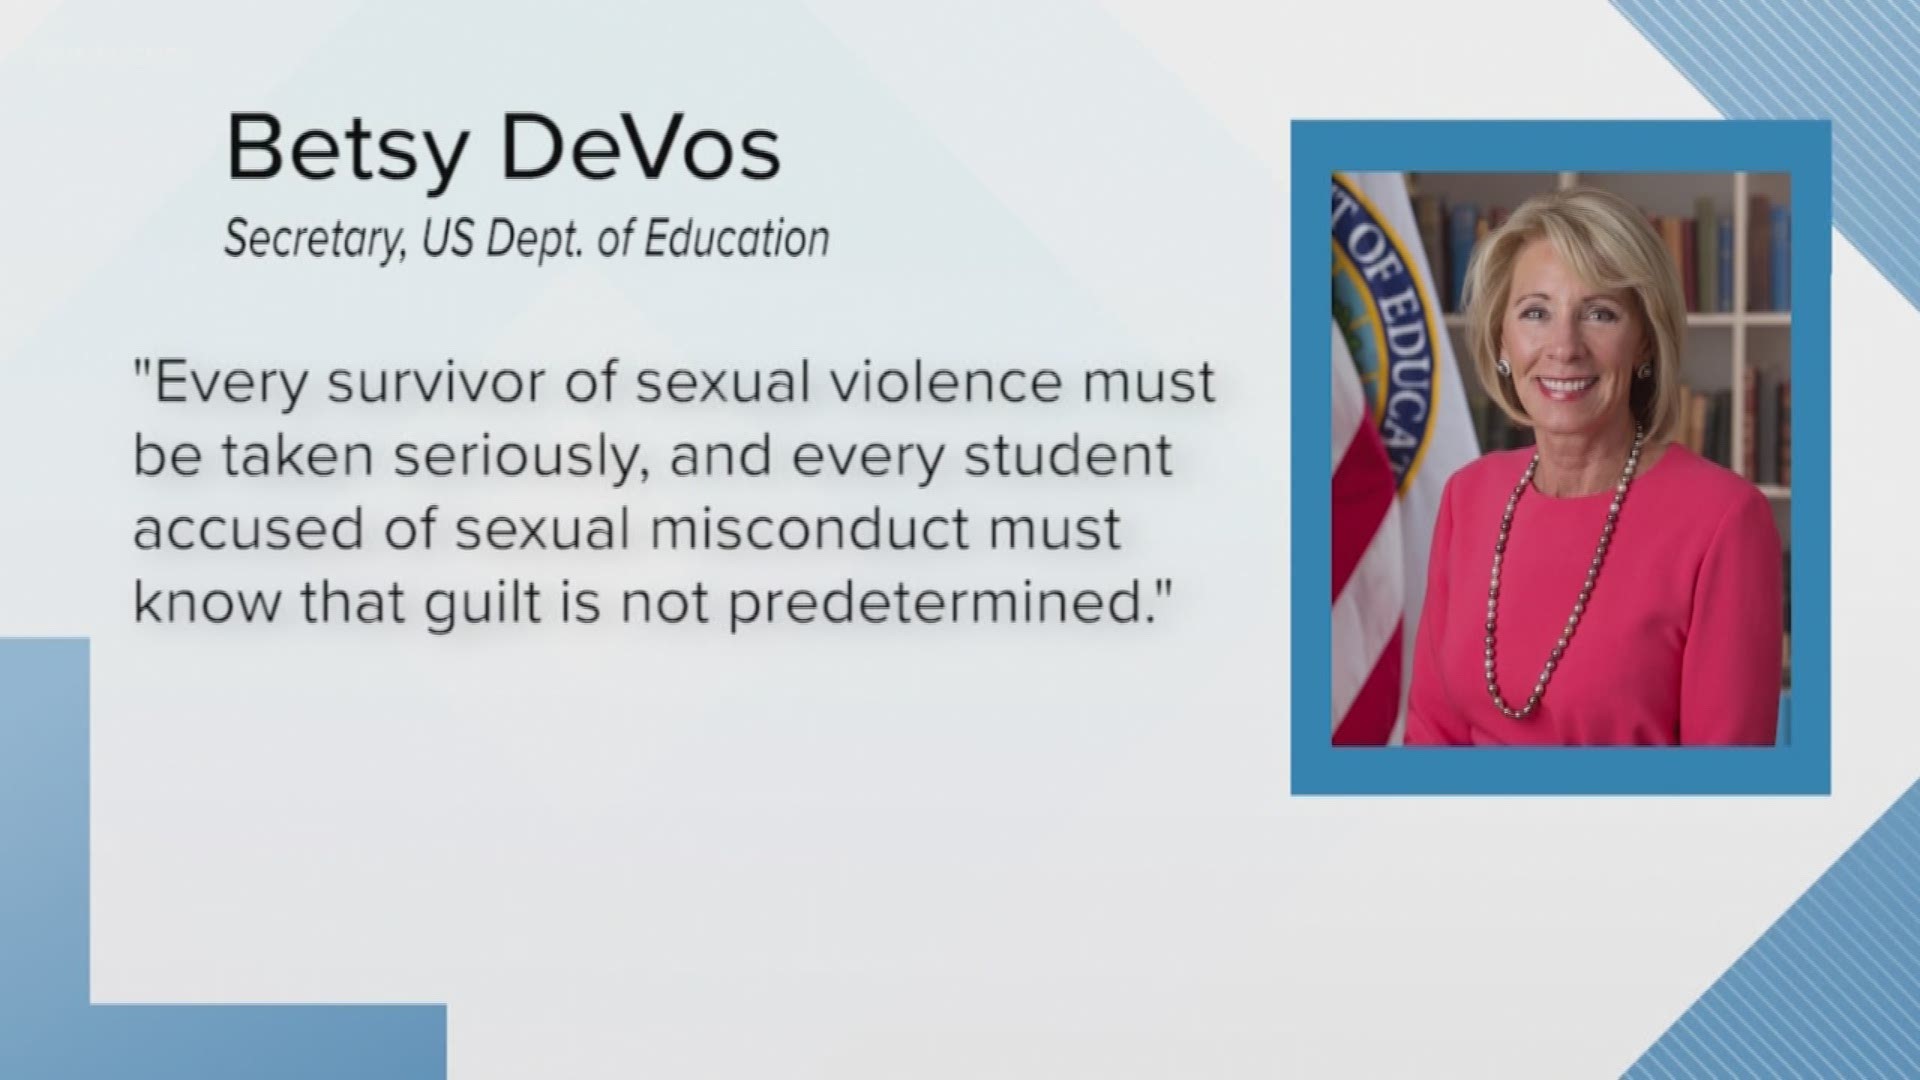 Education Secretary Betsy DeVos on Friday proposed a major overhaul to the way colleges and universities handle complaints of sexual misconduct, adding protections for students accused of assault and harassment, and narrowing the types of cases schools wo